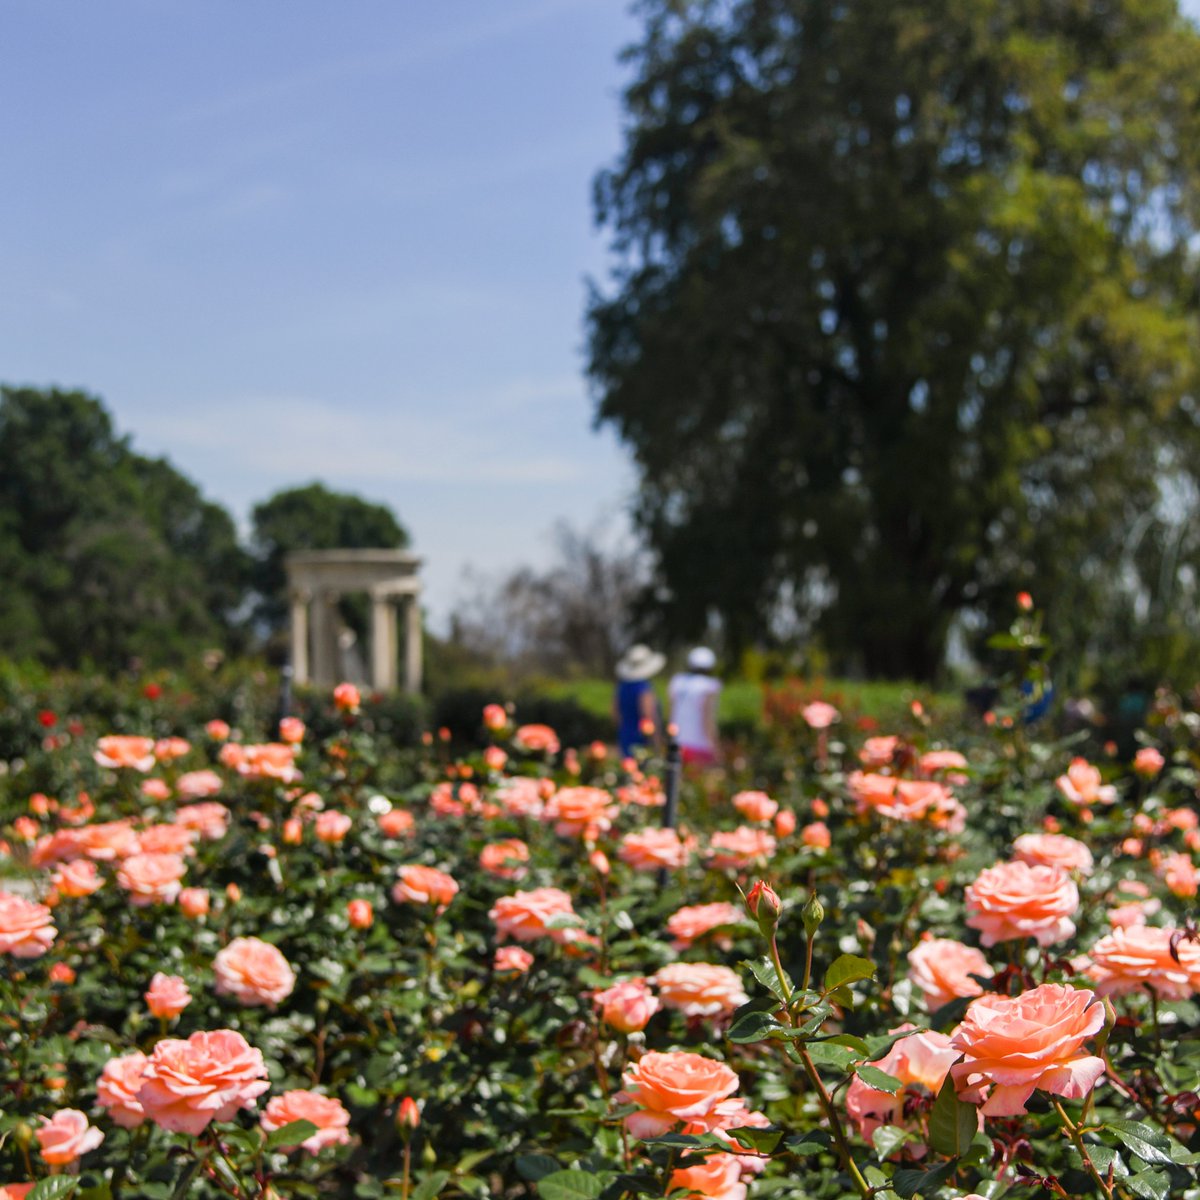 Get ready to enjoy live music in the Rose Garden! 🎼🌹 Starting Monday, April 22, the Rose Garden will host classical performers weekly from 1–3 p.m., in collaboration with the Pasadena Conservatory of Music. Free with general admission! bit.ly/49q5KKf